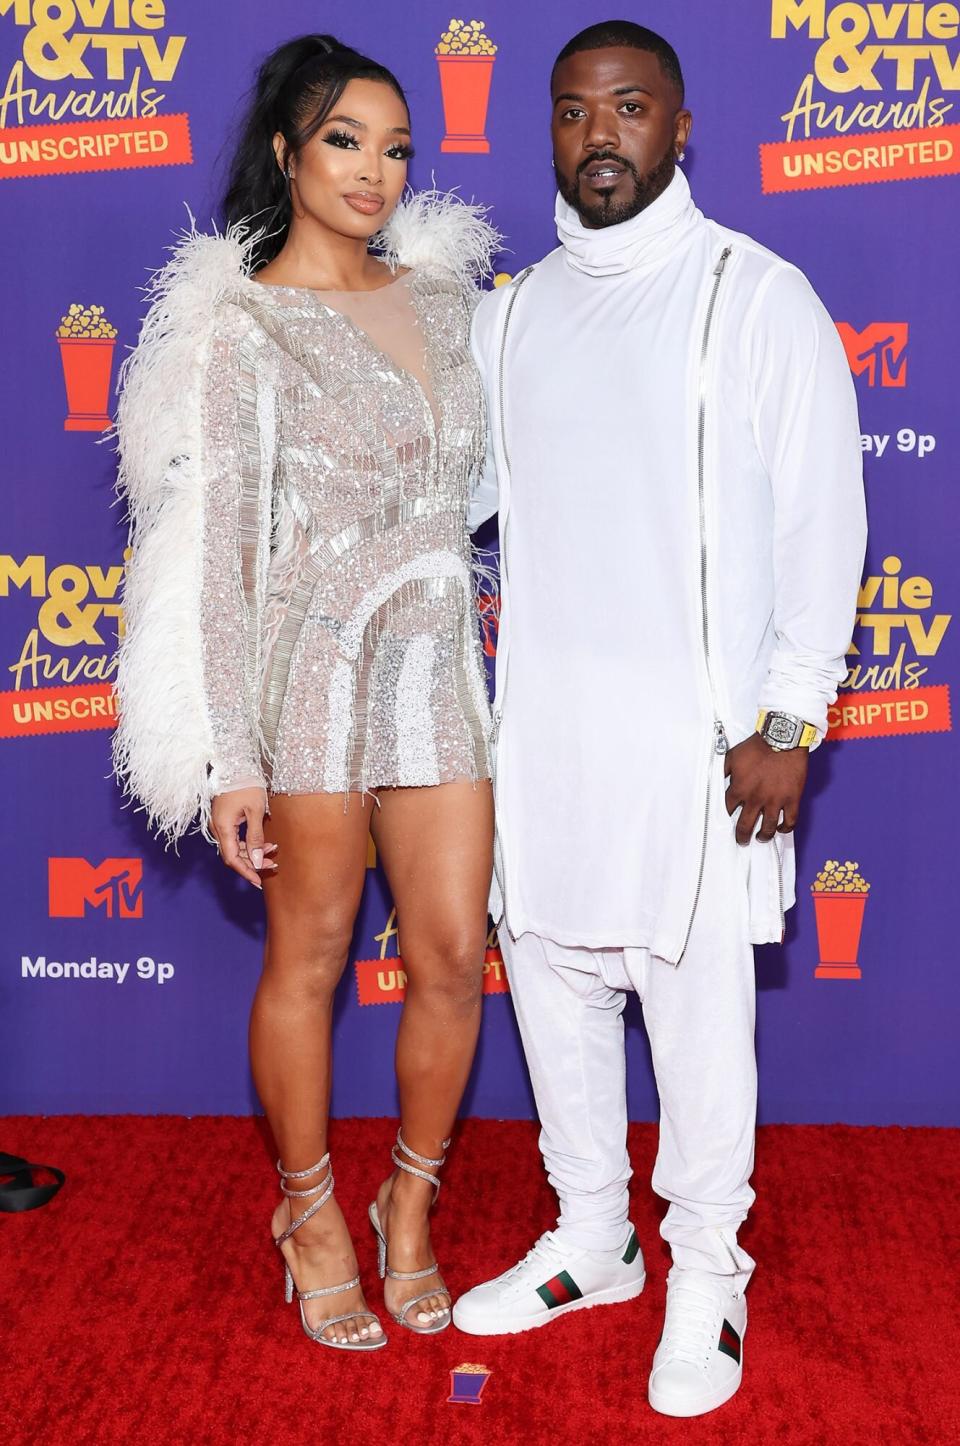 Princess Love and Ray J attend the 2021 MTV Movie & TV Awards: UNSCRIPTED